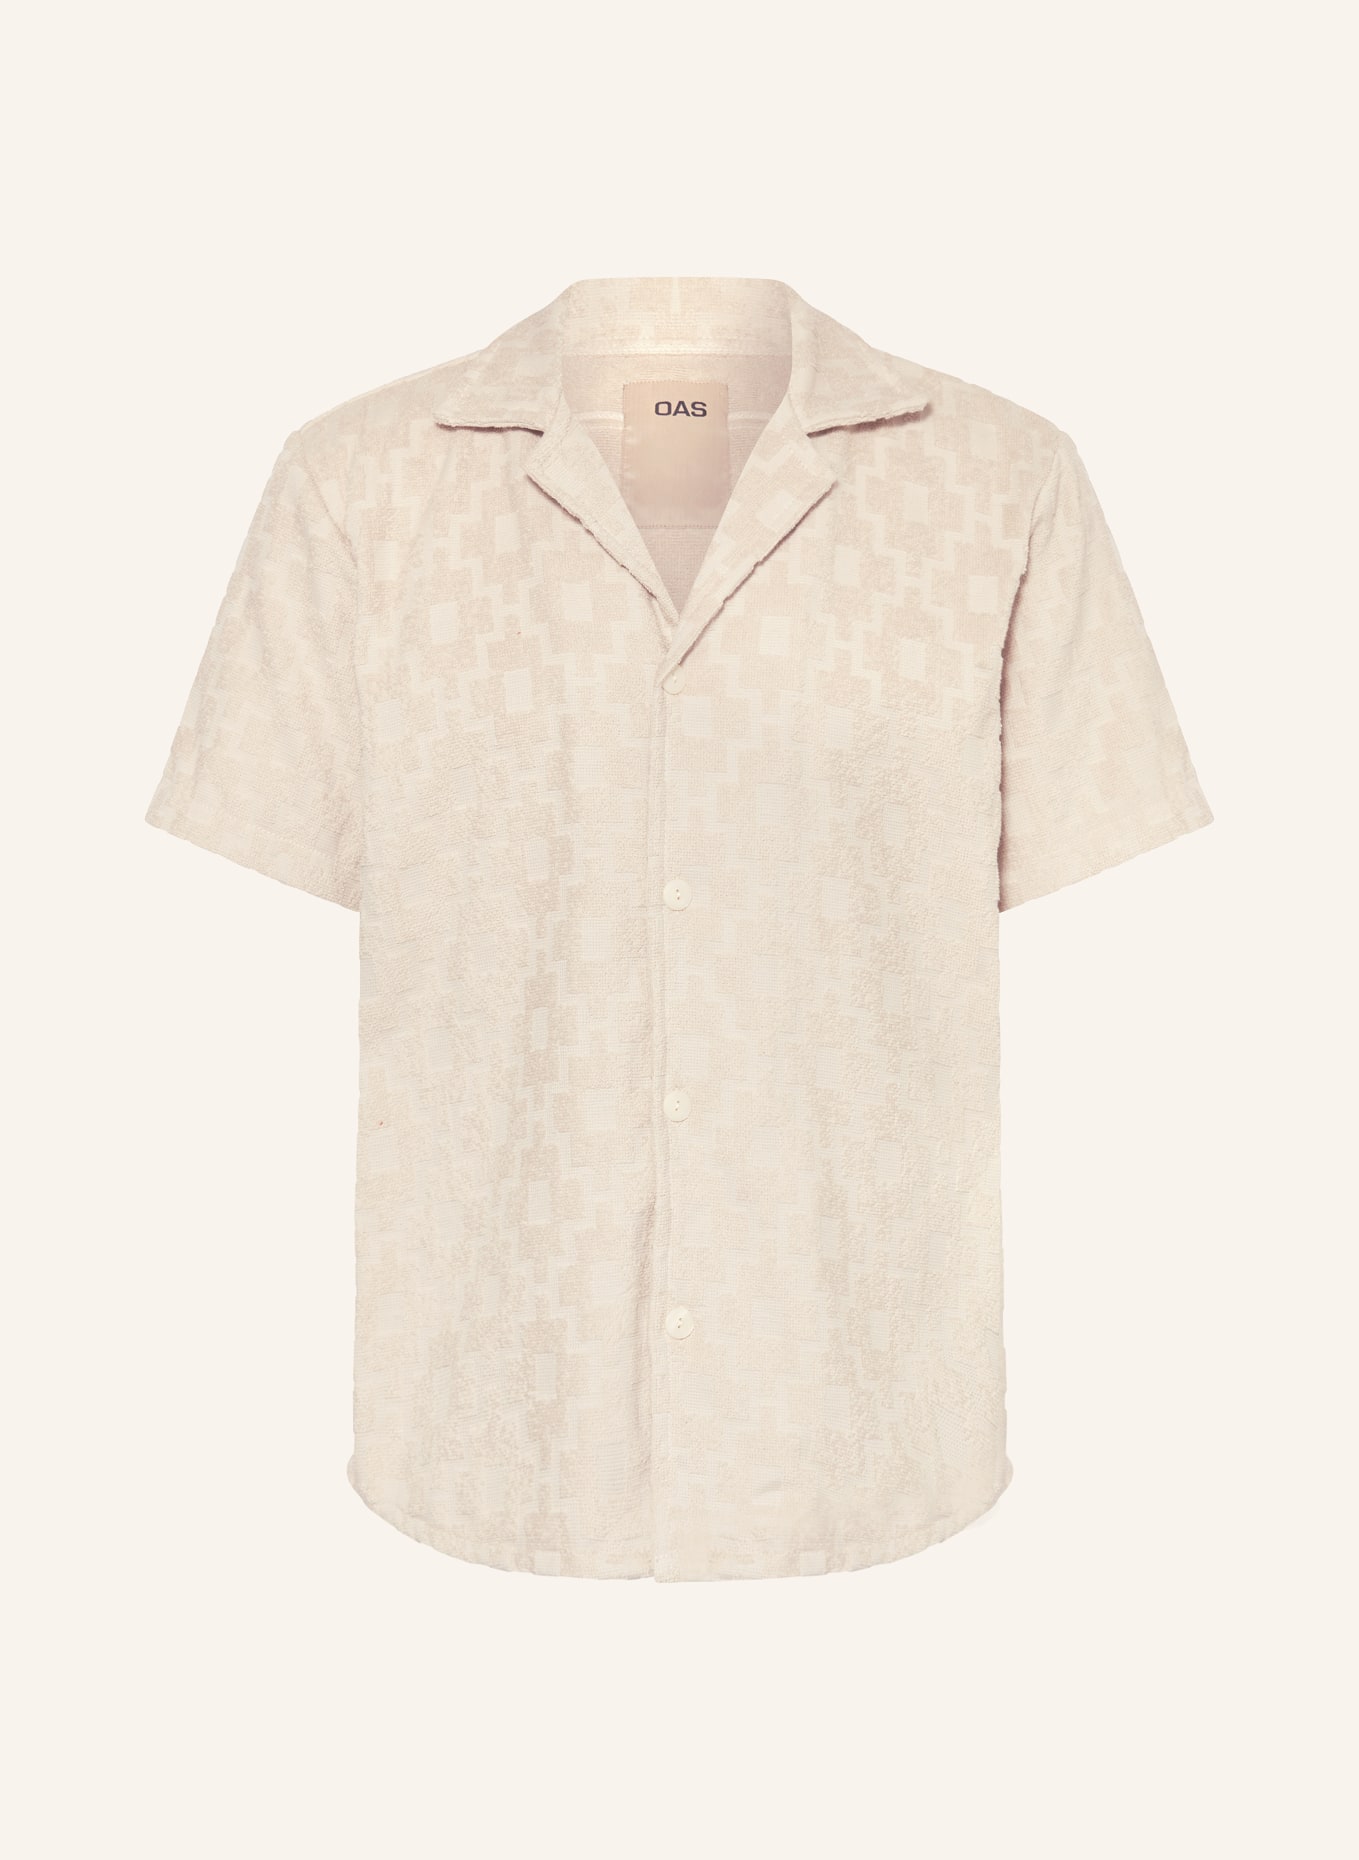 OAS Resort shirt comfort fit in terry cloth, Color: LIGHT BROWN (Image 1)